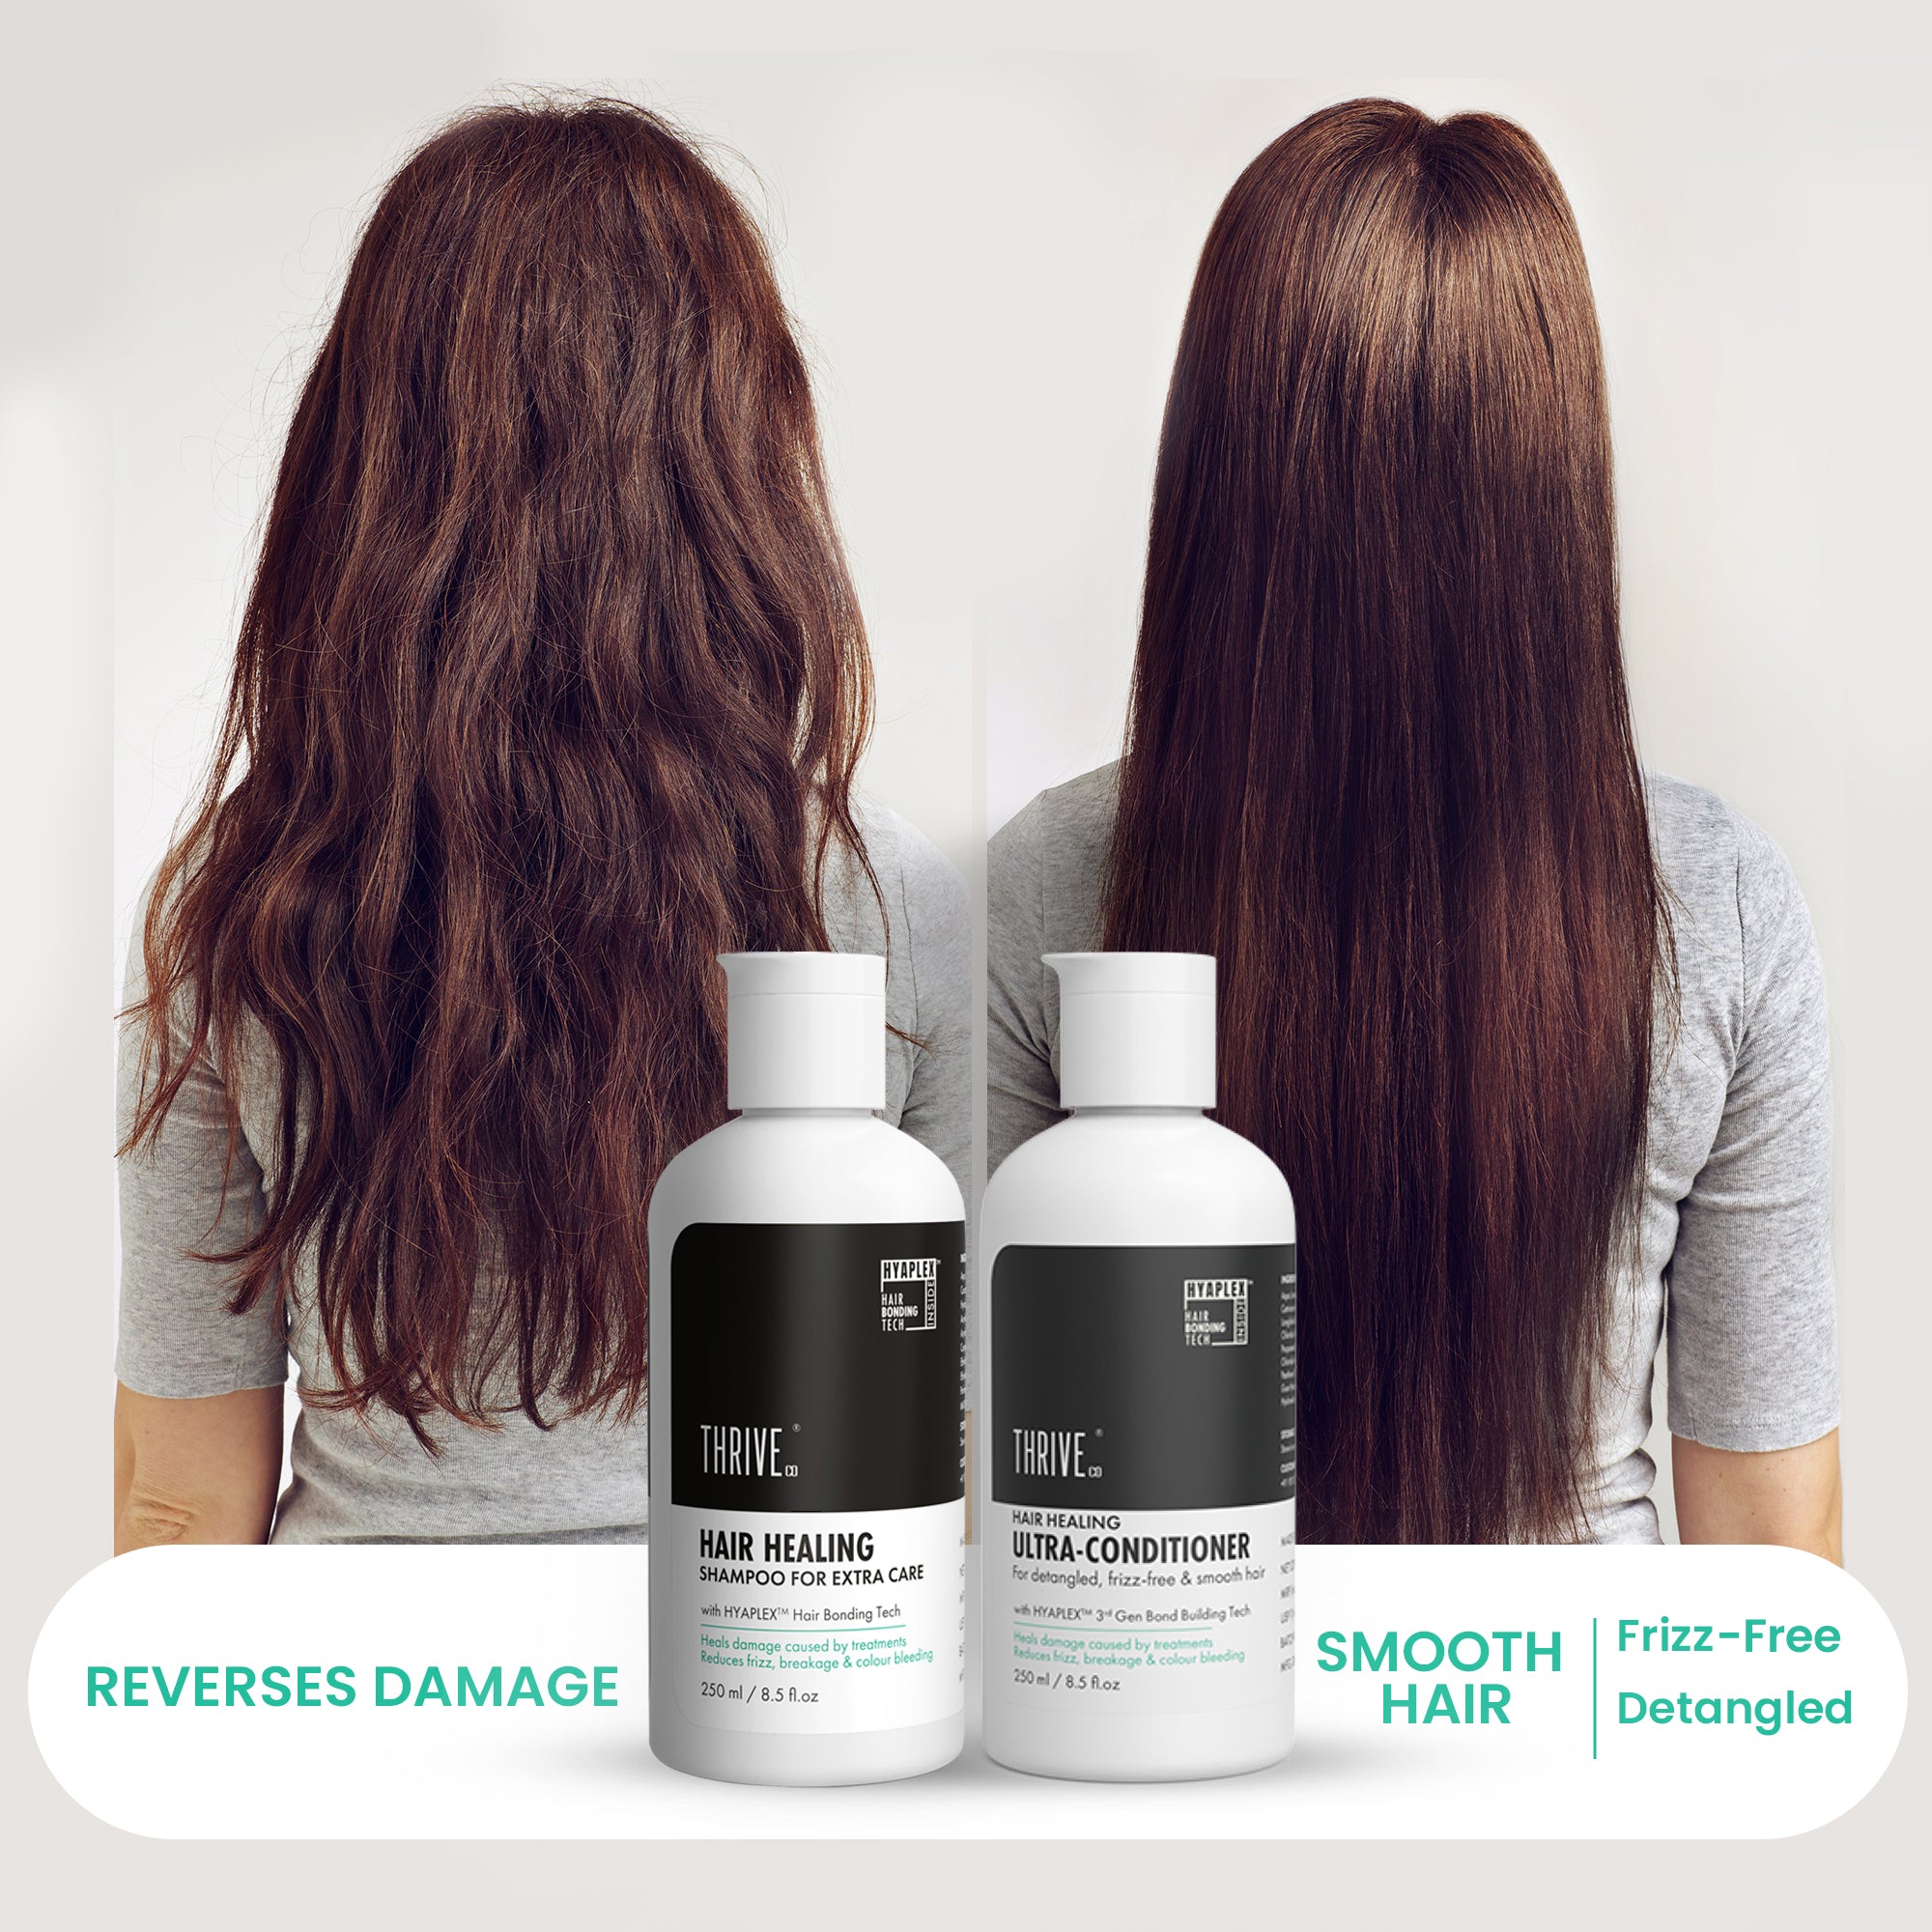 ThriveCo Hair Healing shampoo and conditioner combo